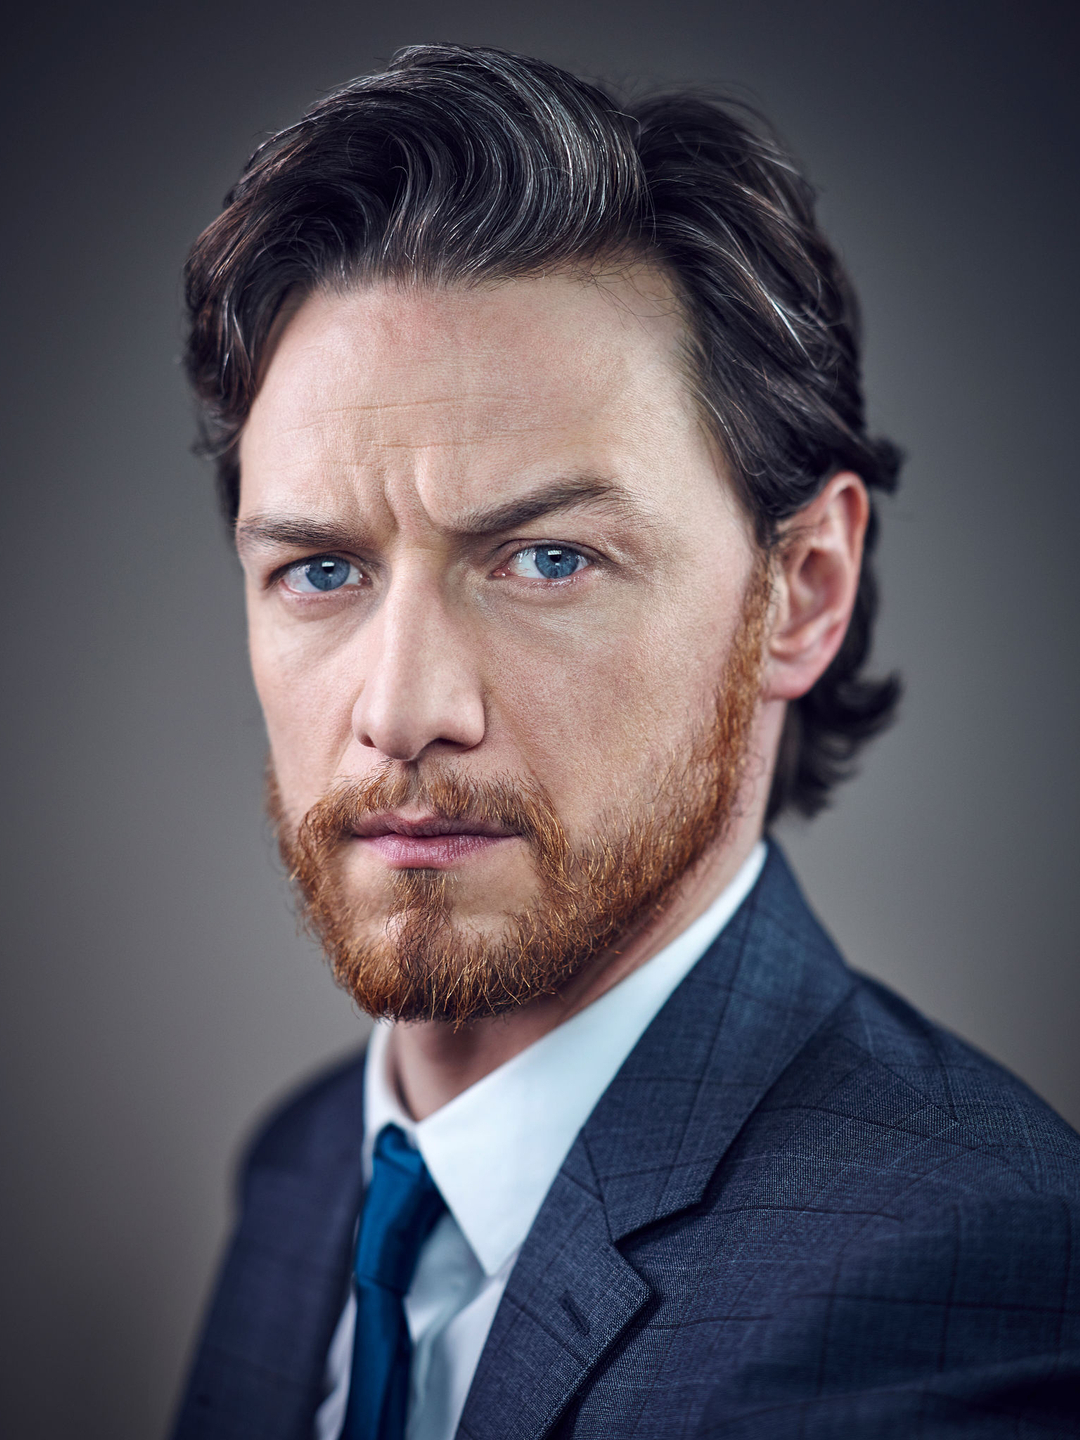 James McAvoy early career